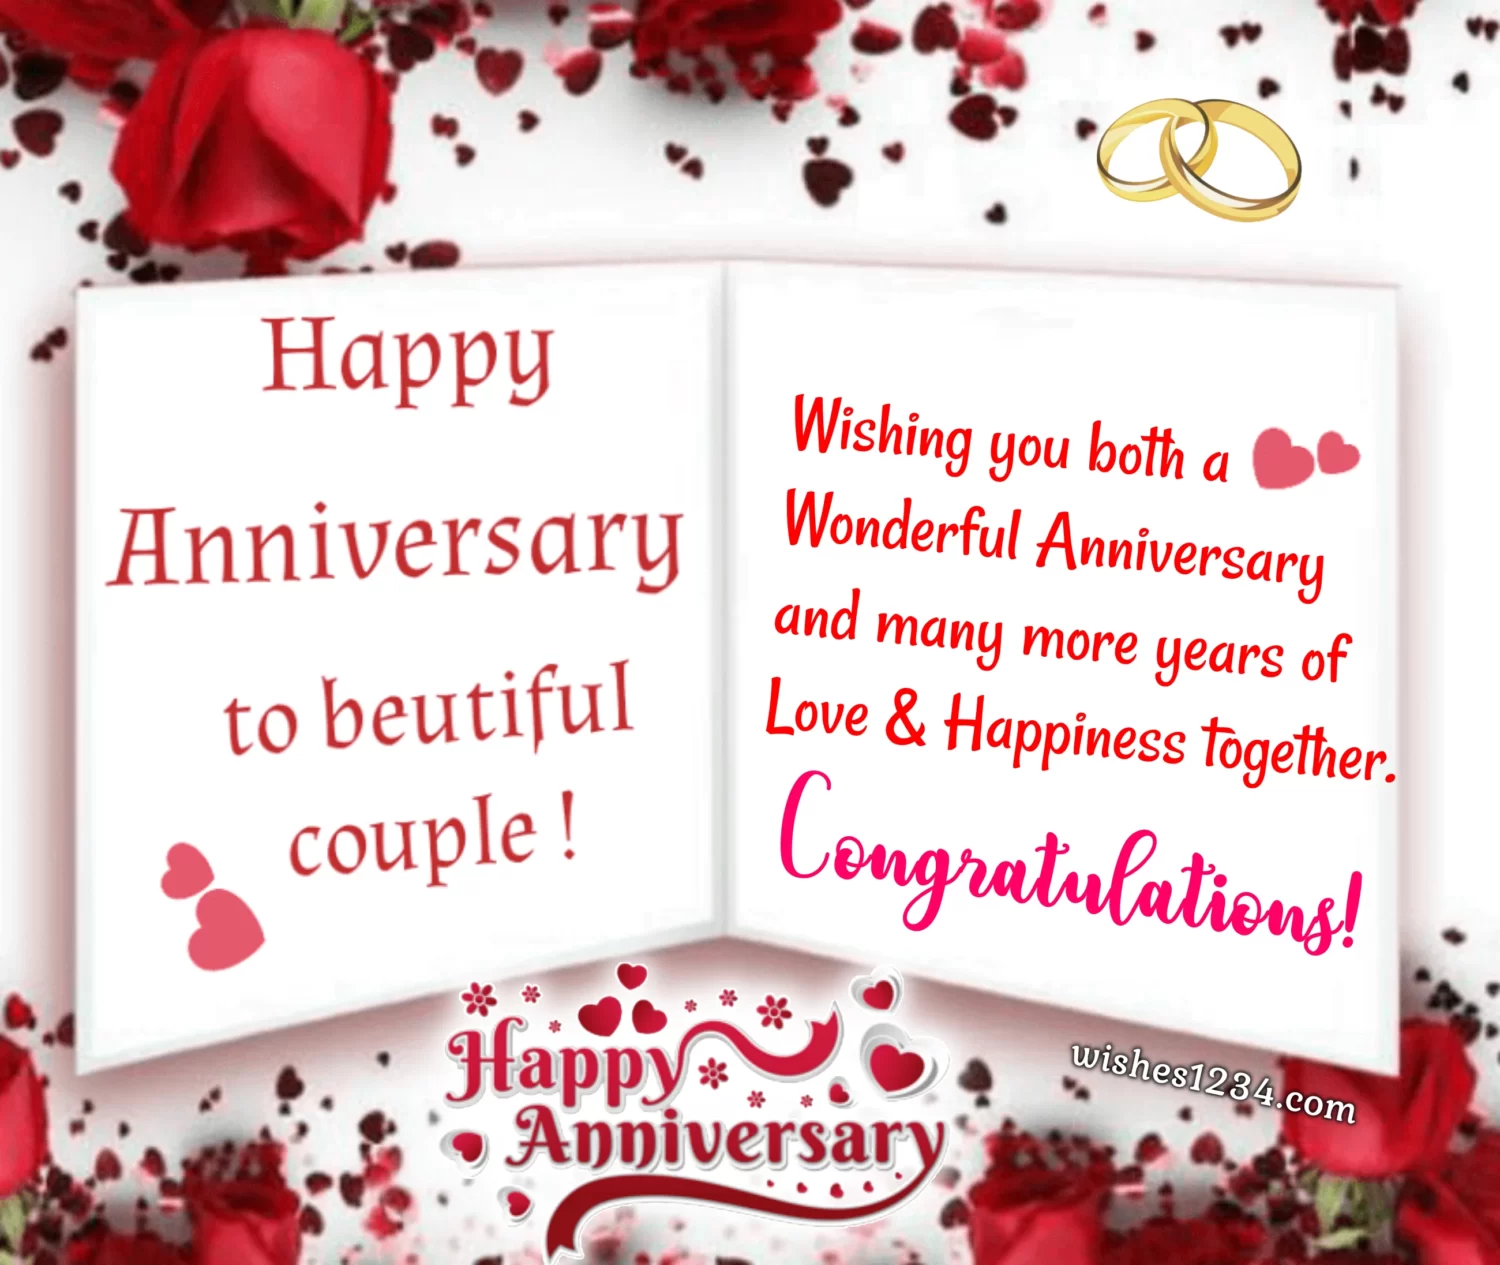 Greeting card with red roses, Wedding anniversary quotes, Wedding Anniversary Wishes for Couple.